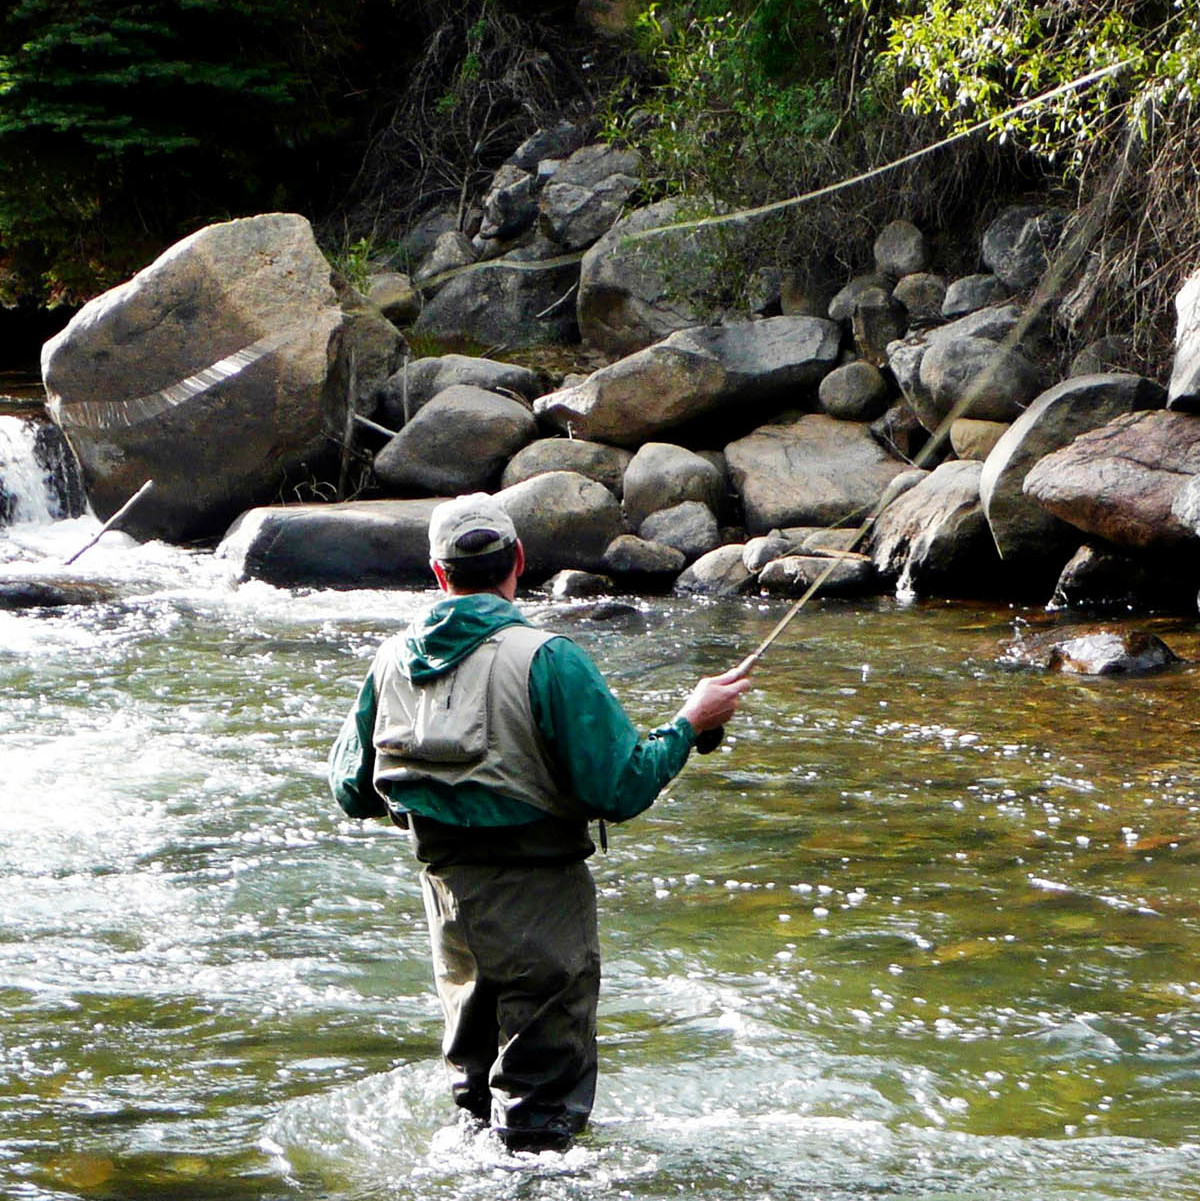 Fly-fisherman standing in a river and casting his reel.